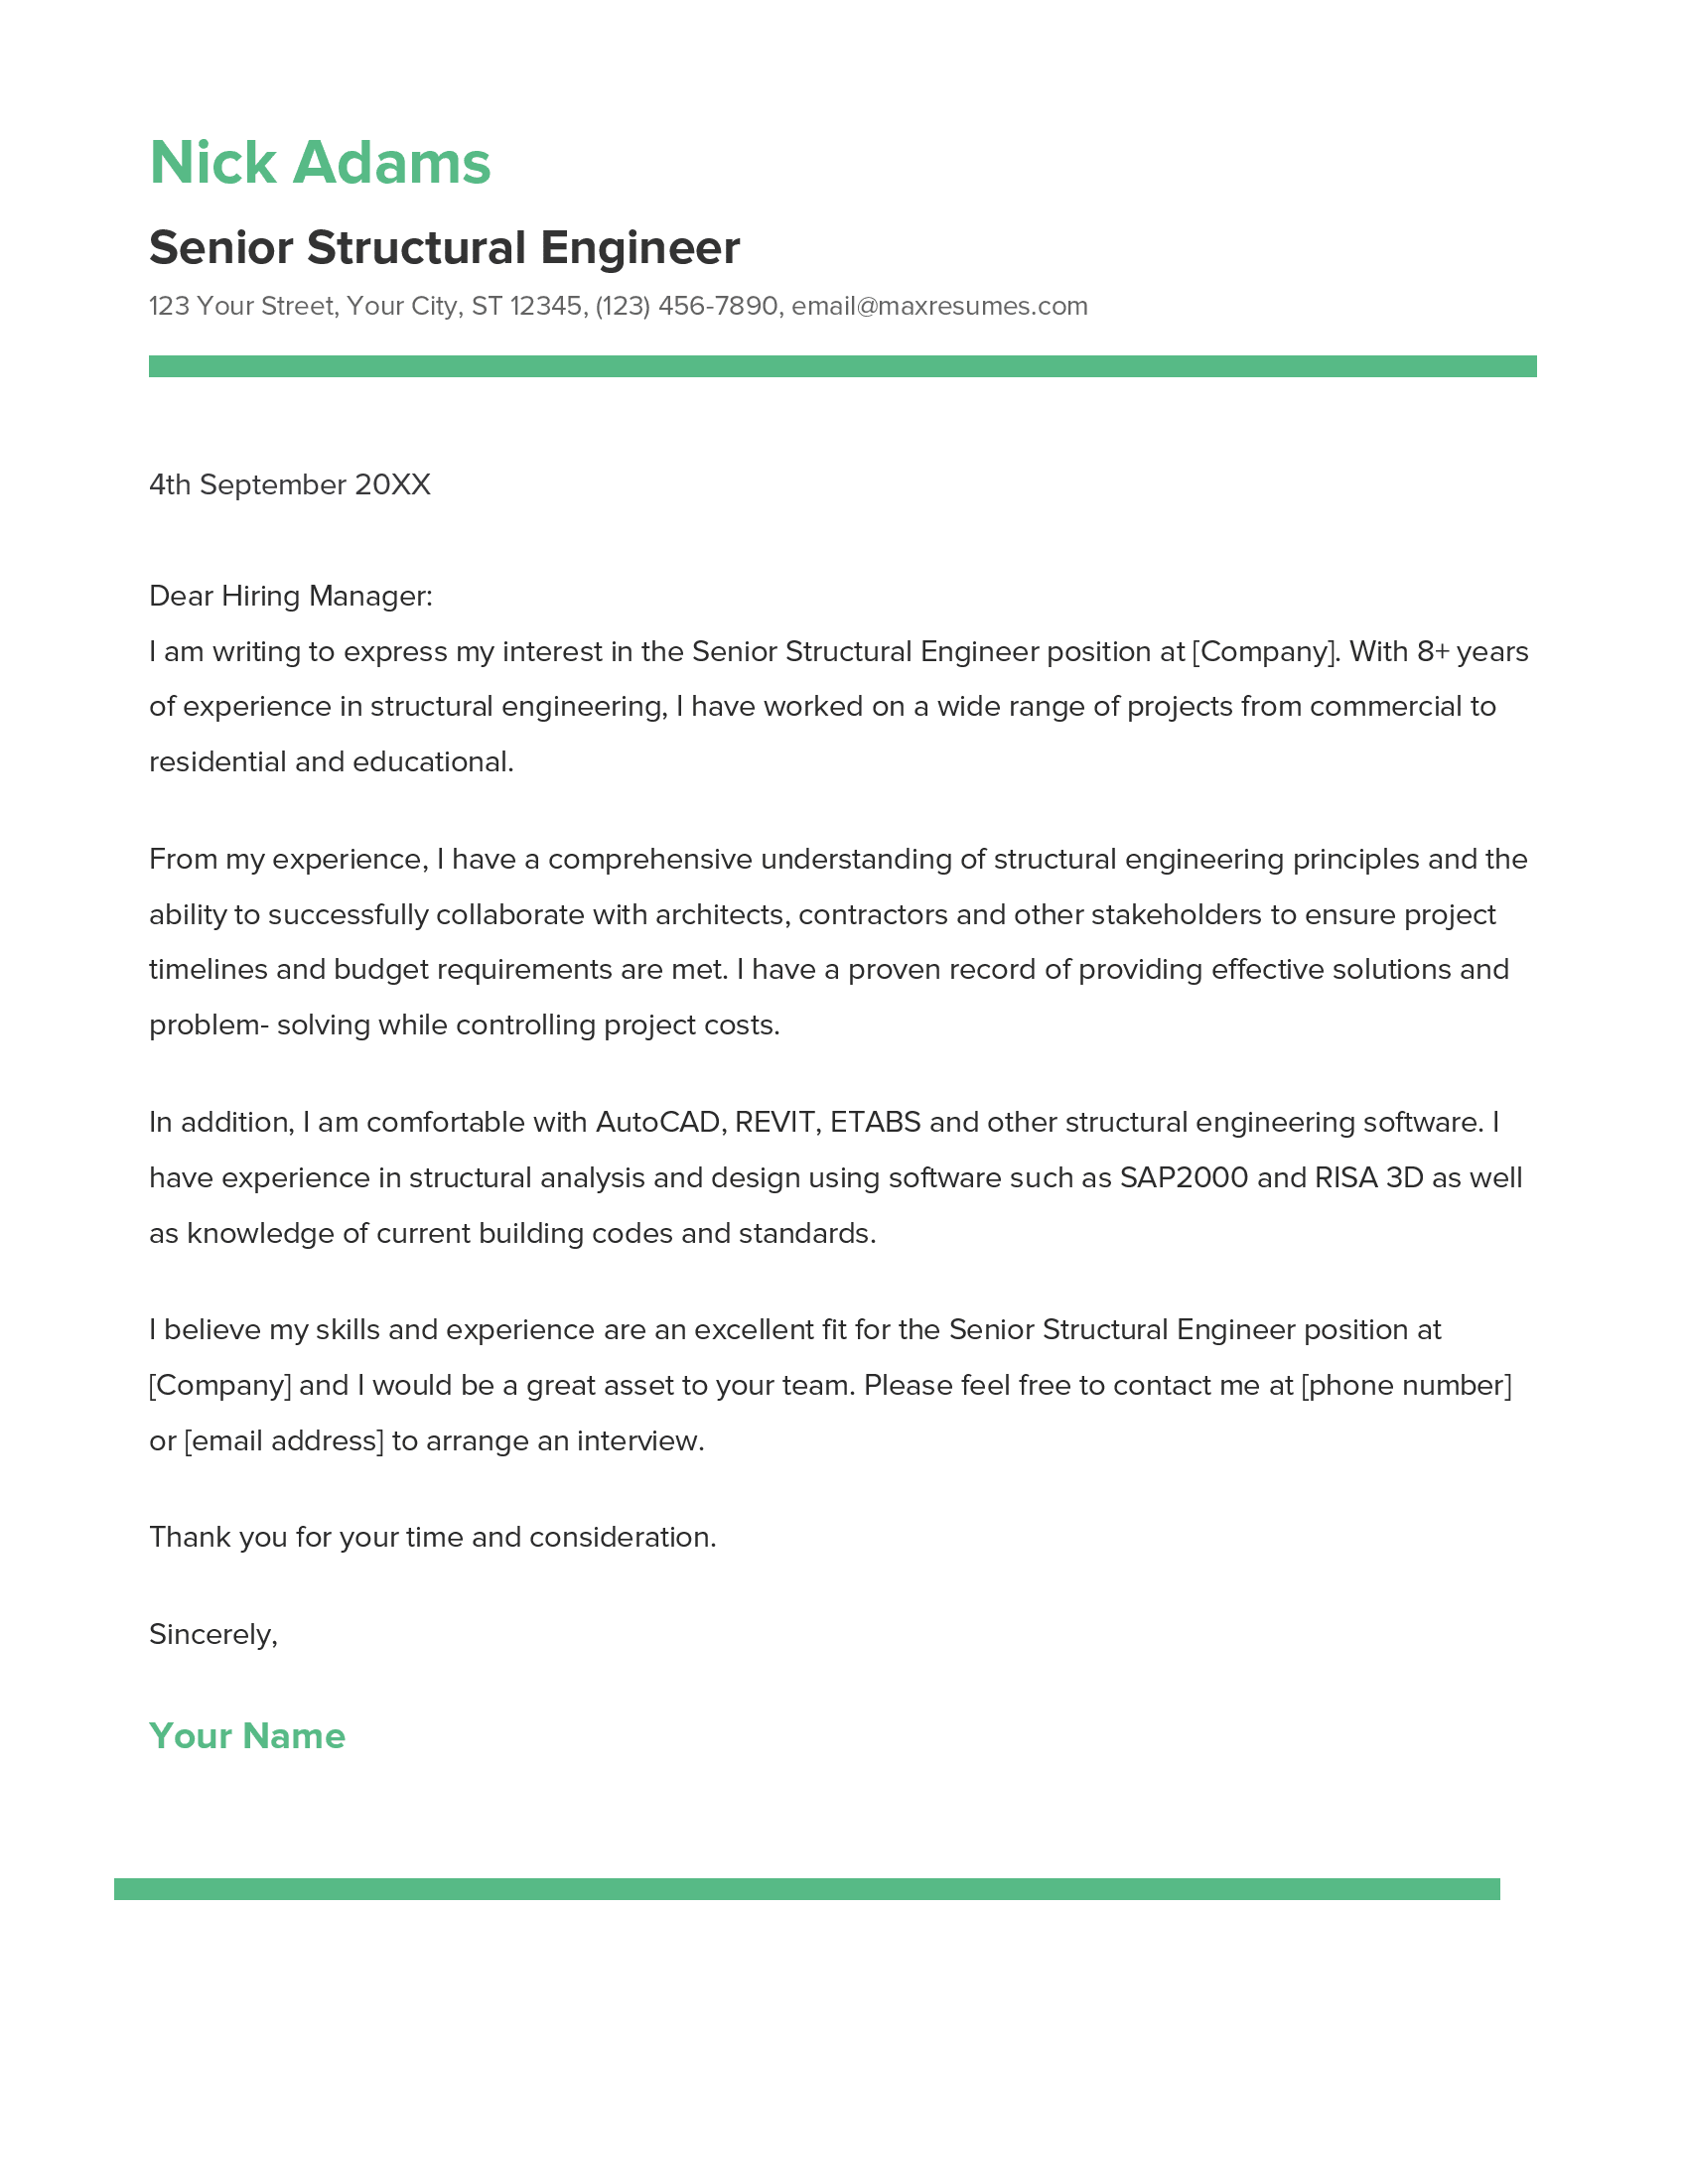 Senior Structural Engineer Cover Letter Example